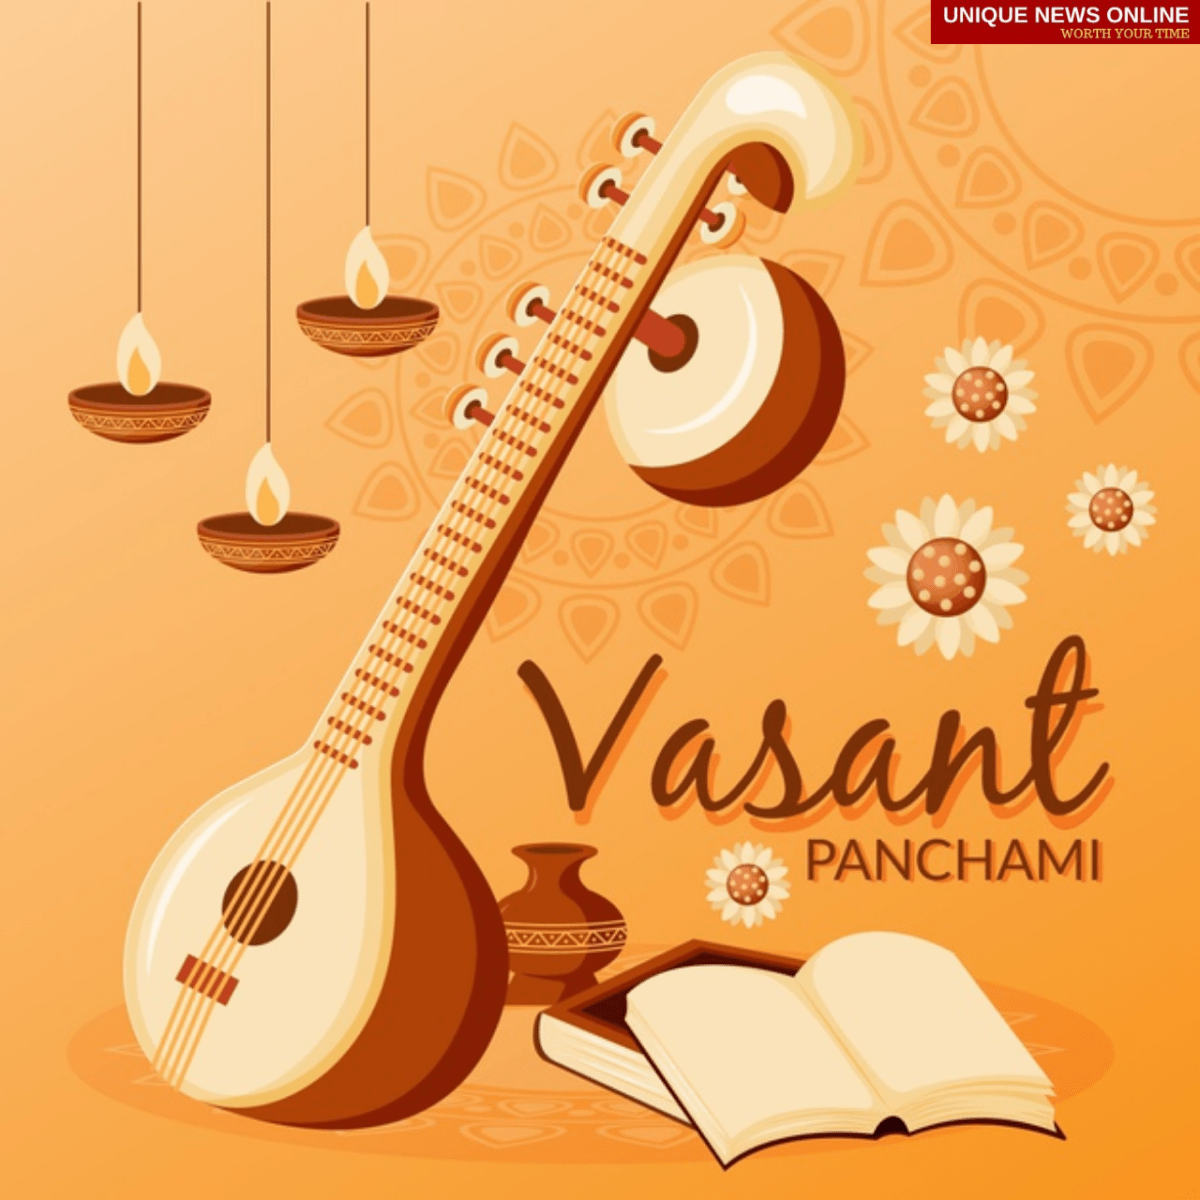 Wishes, Greetings, Messages and Quotes to share #Basantpanchami